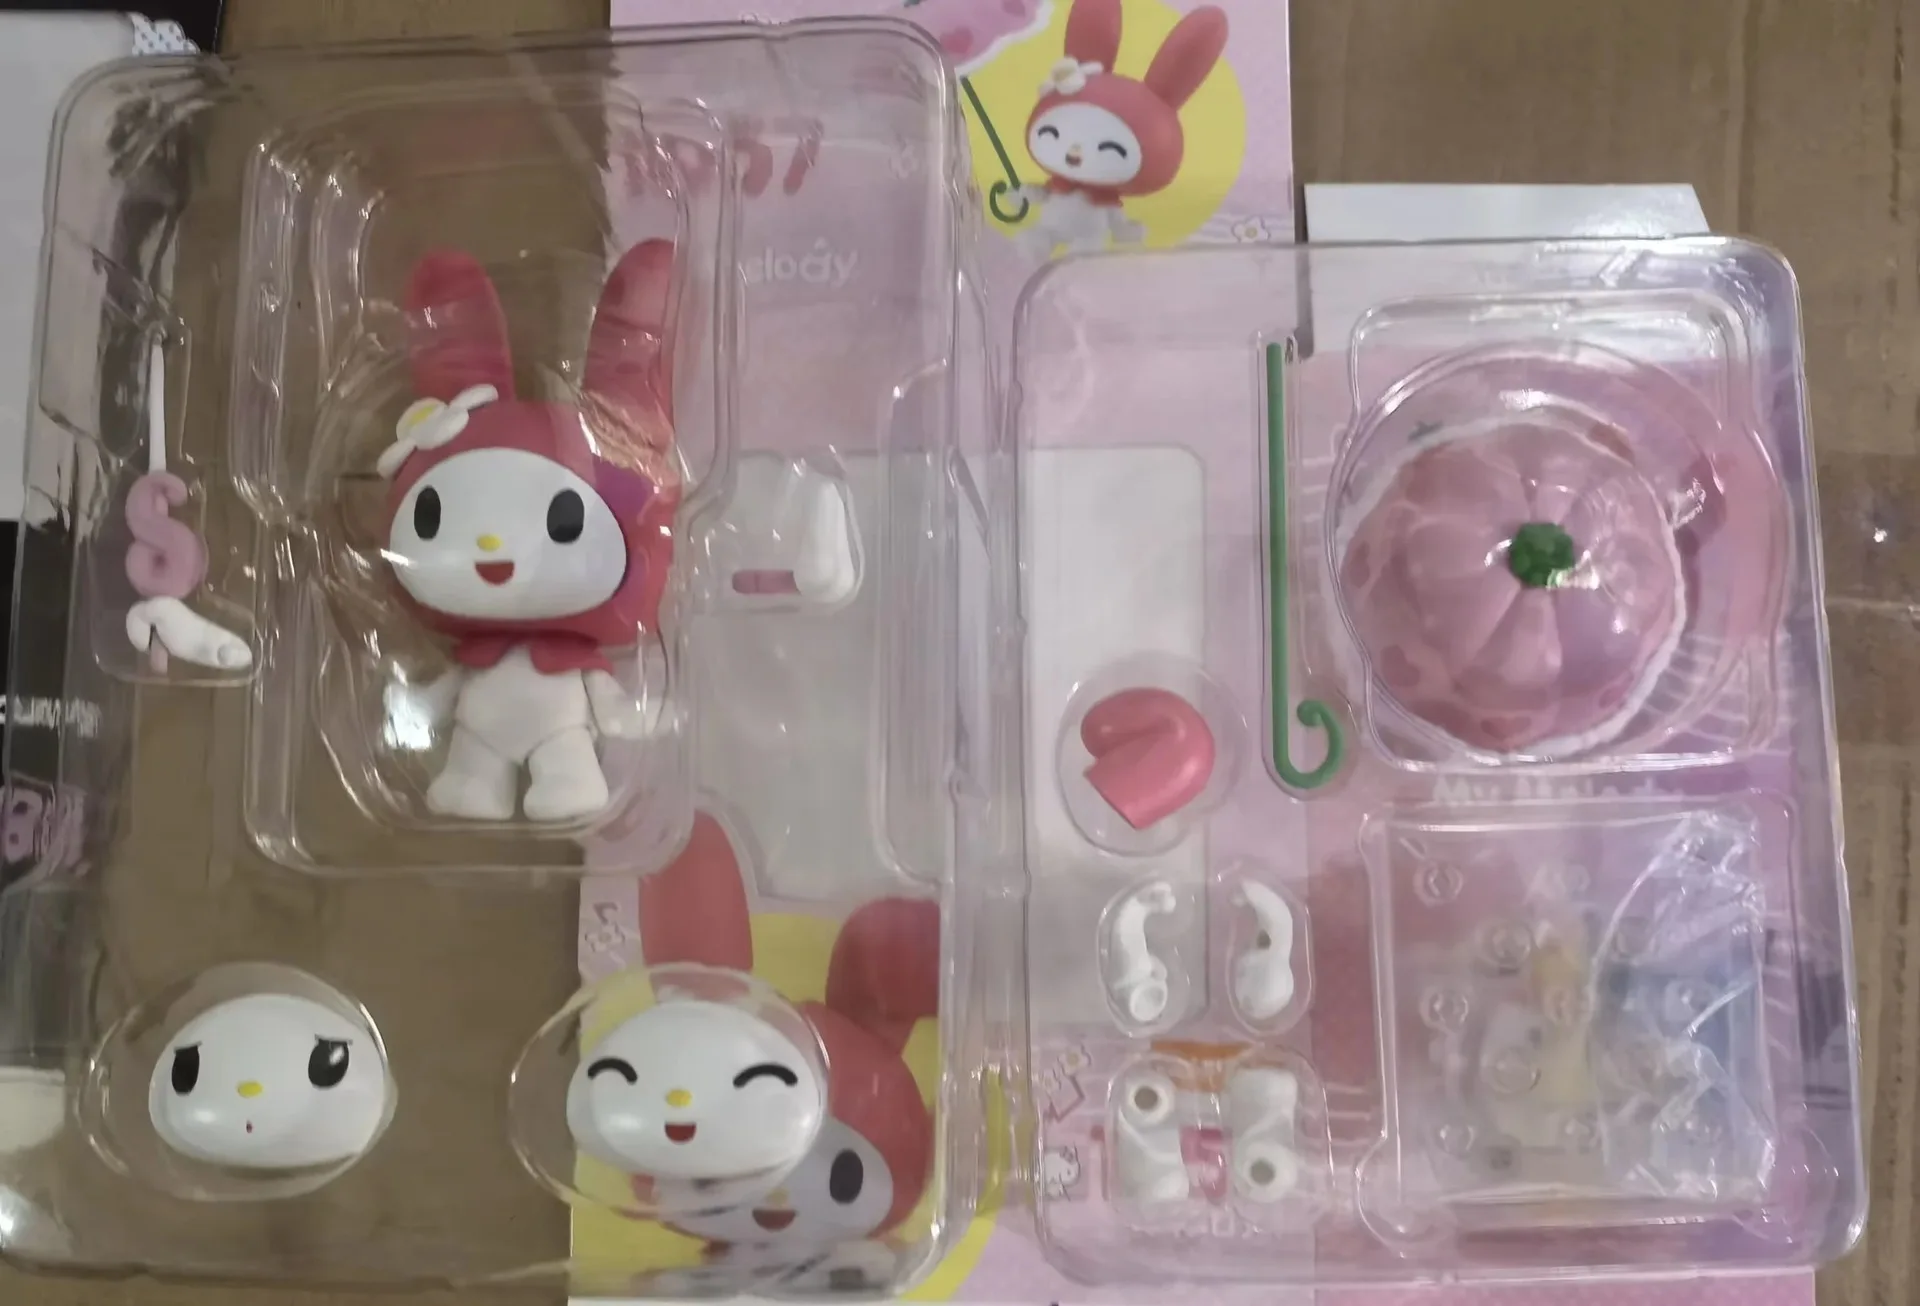 Kuromi Melody Articulated Cute Action Figure Toys 1 - My Melody Plush